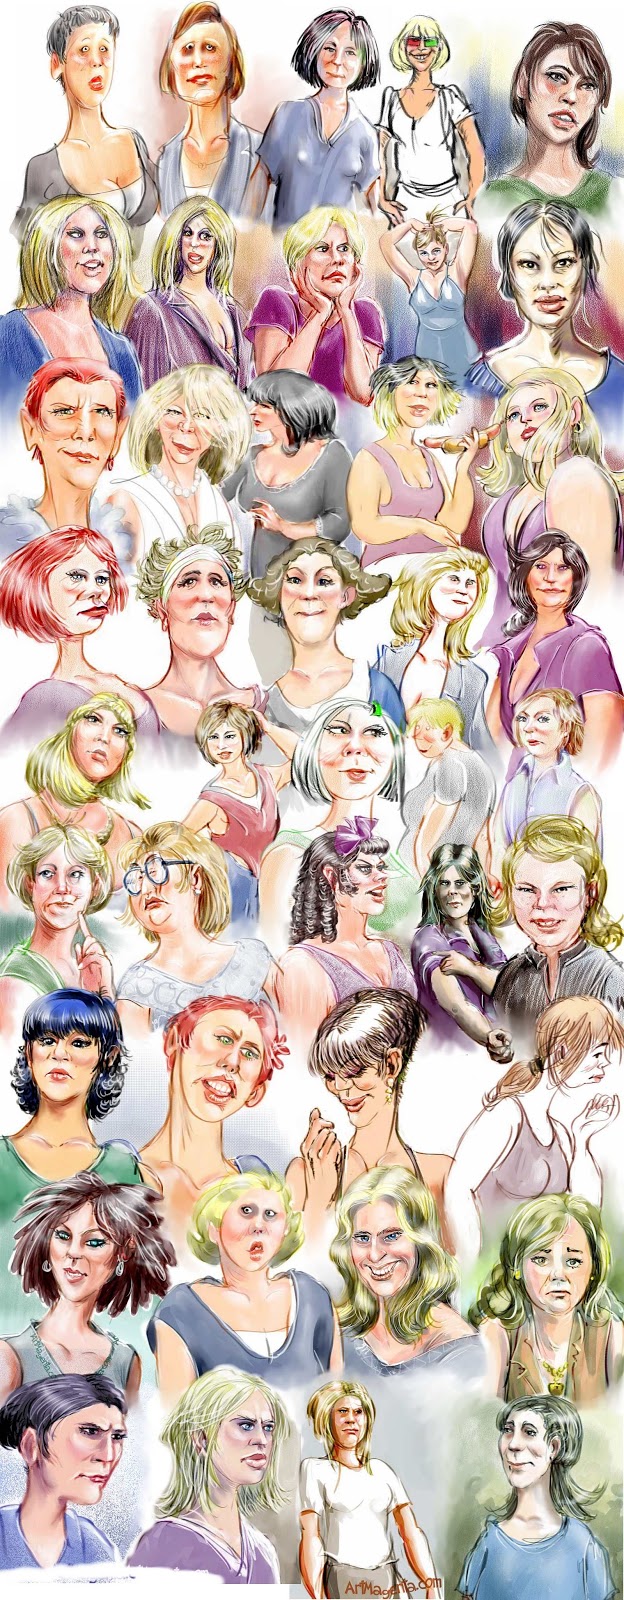 A gallery of women caricature portraits by Ulf ArtMagenta